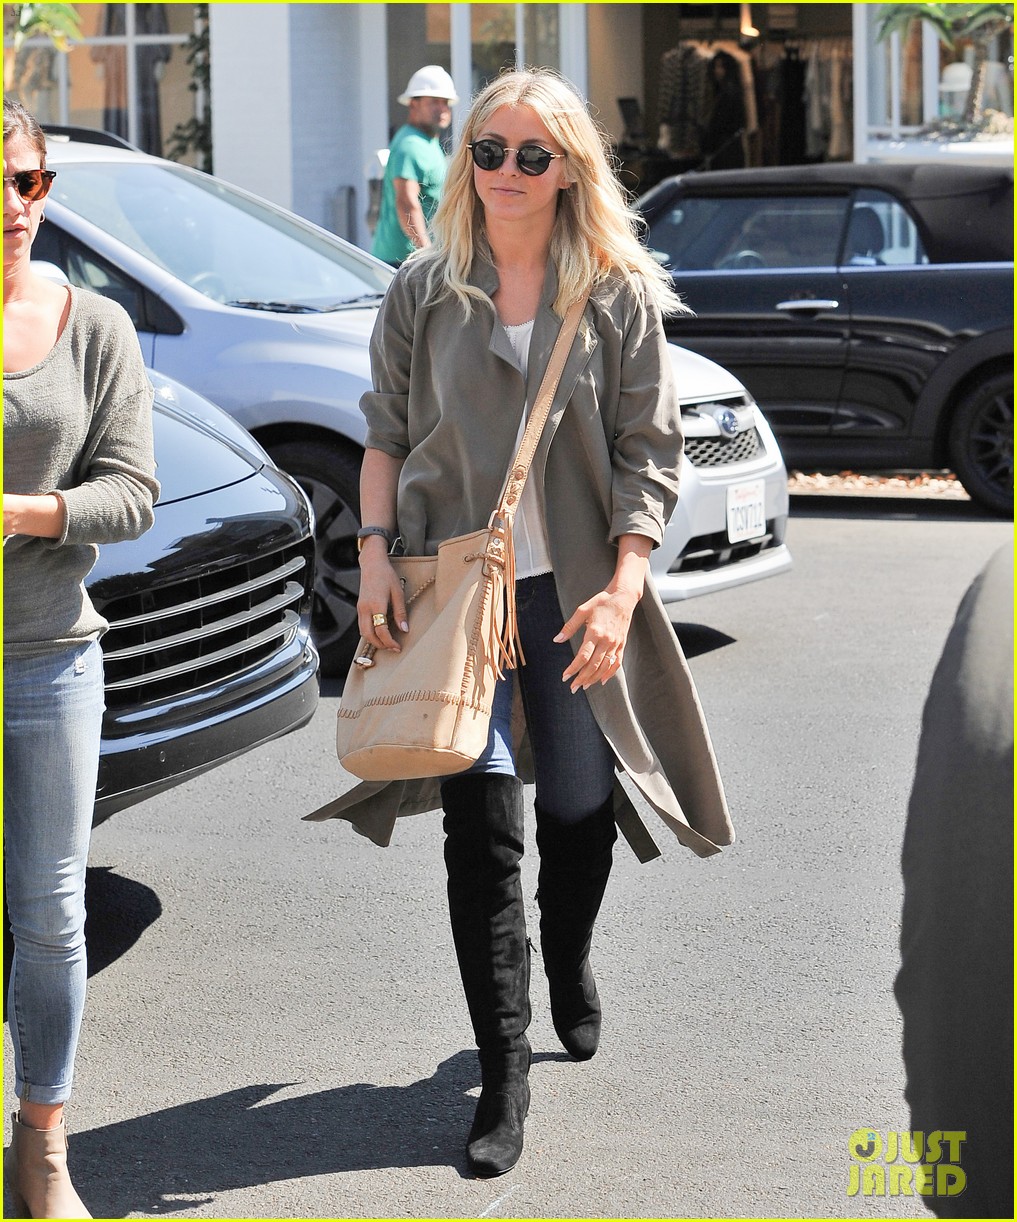 julianne hough enjoys her afternoon shopping20317mytext3760290